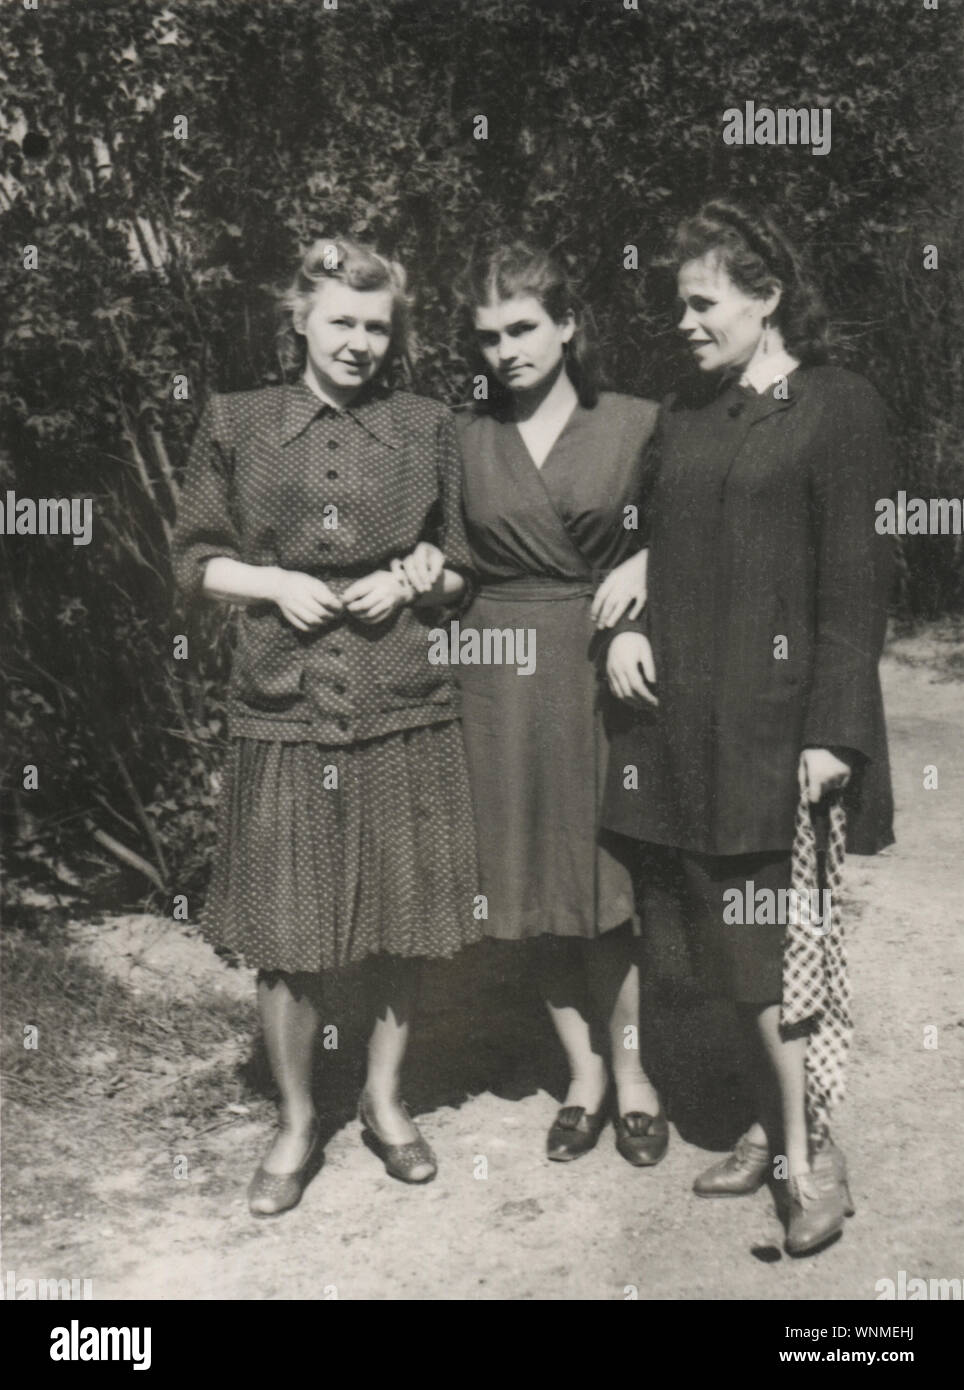 Vintage photography of  the three Russian women outdoors in Germany, 1945-1947 Stock Photo